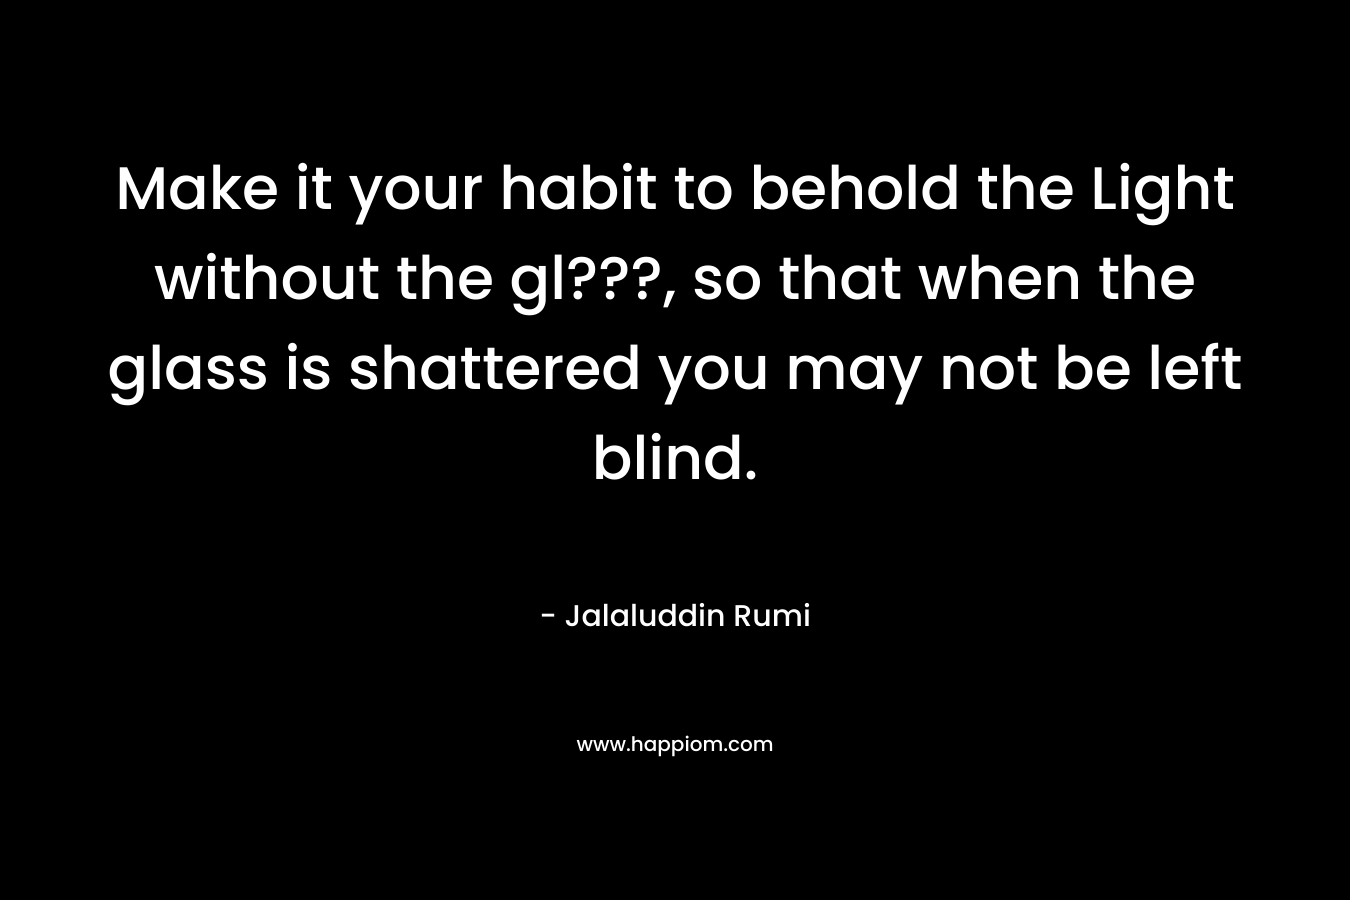 Make it your habit to behold the Light without the gl???, so that when the glass is shattered you may not be left blind.